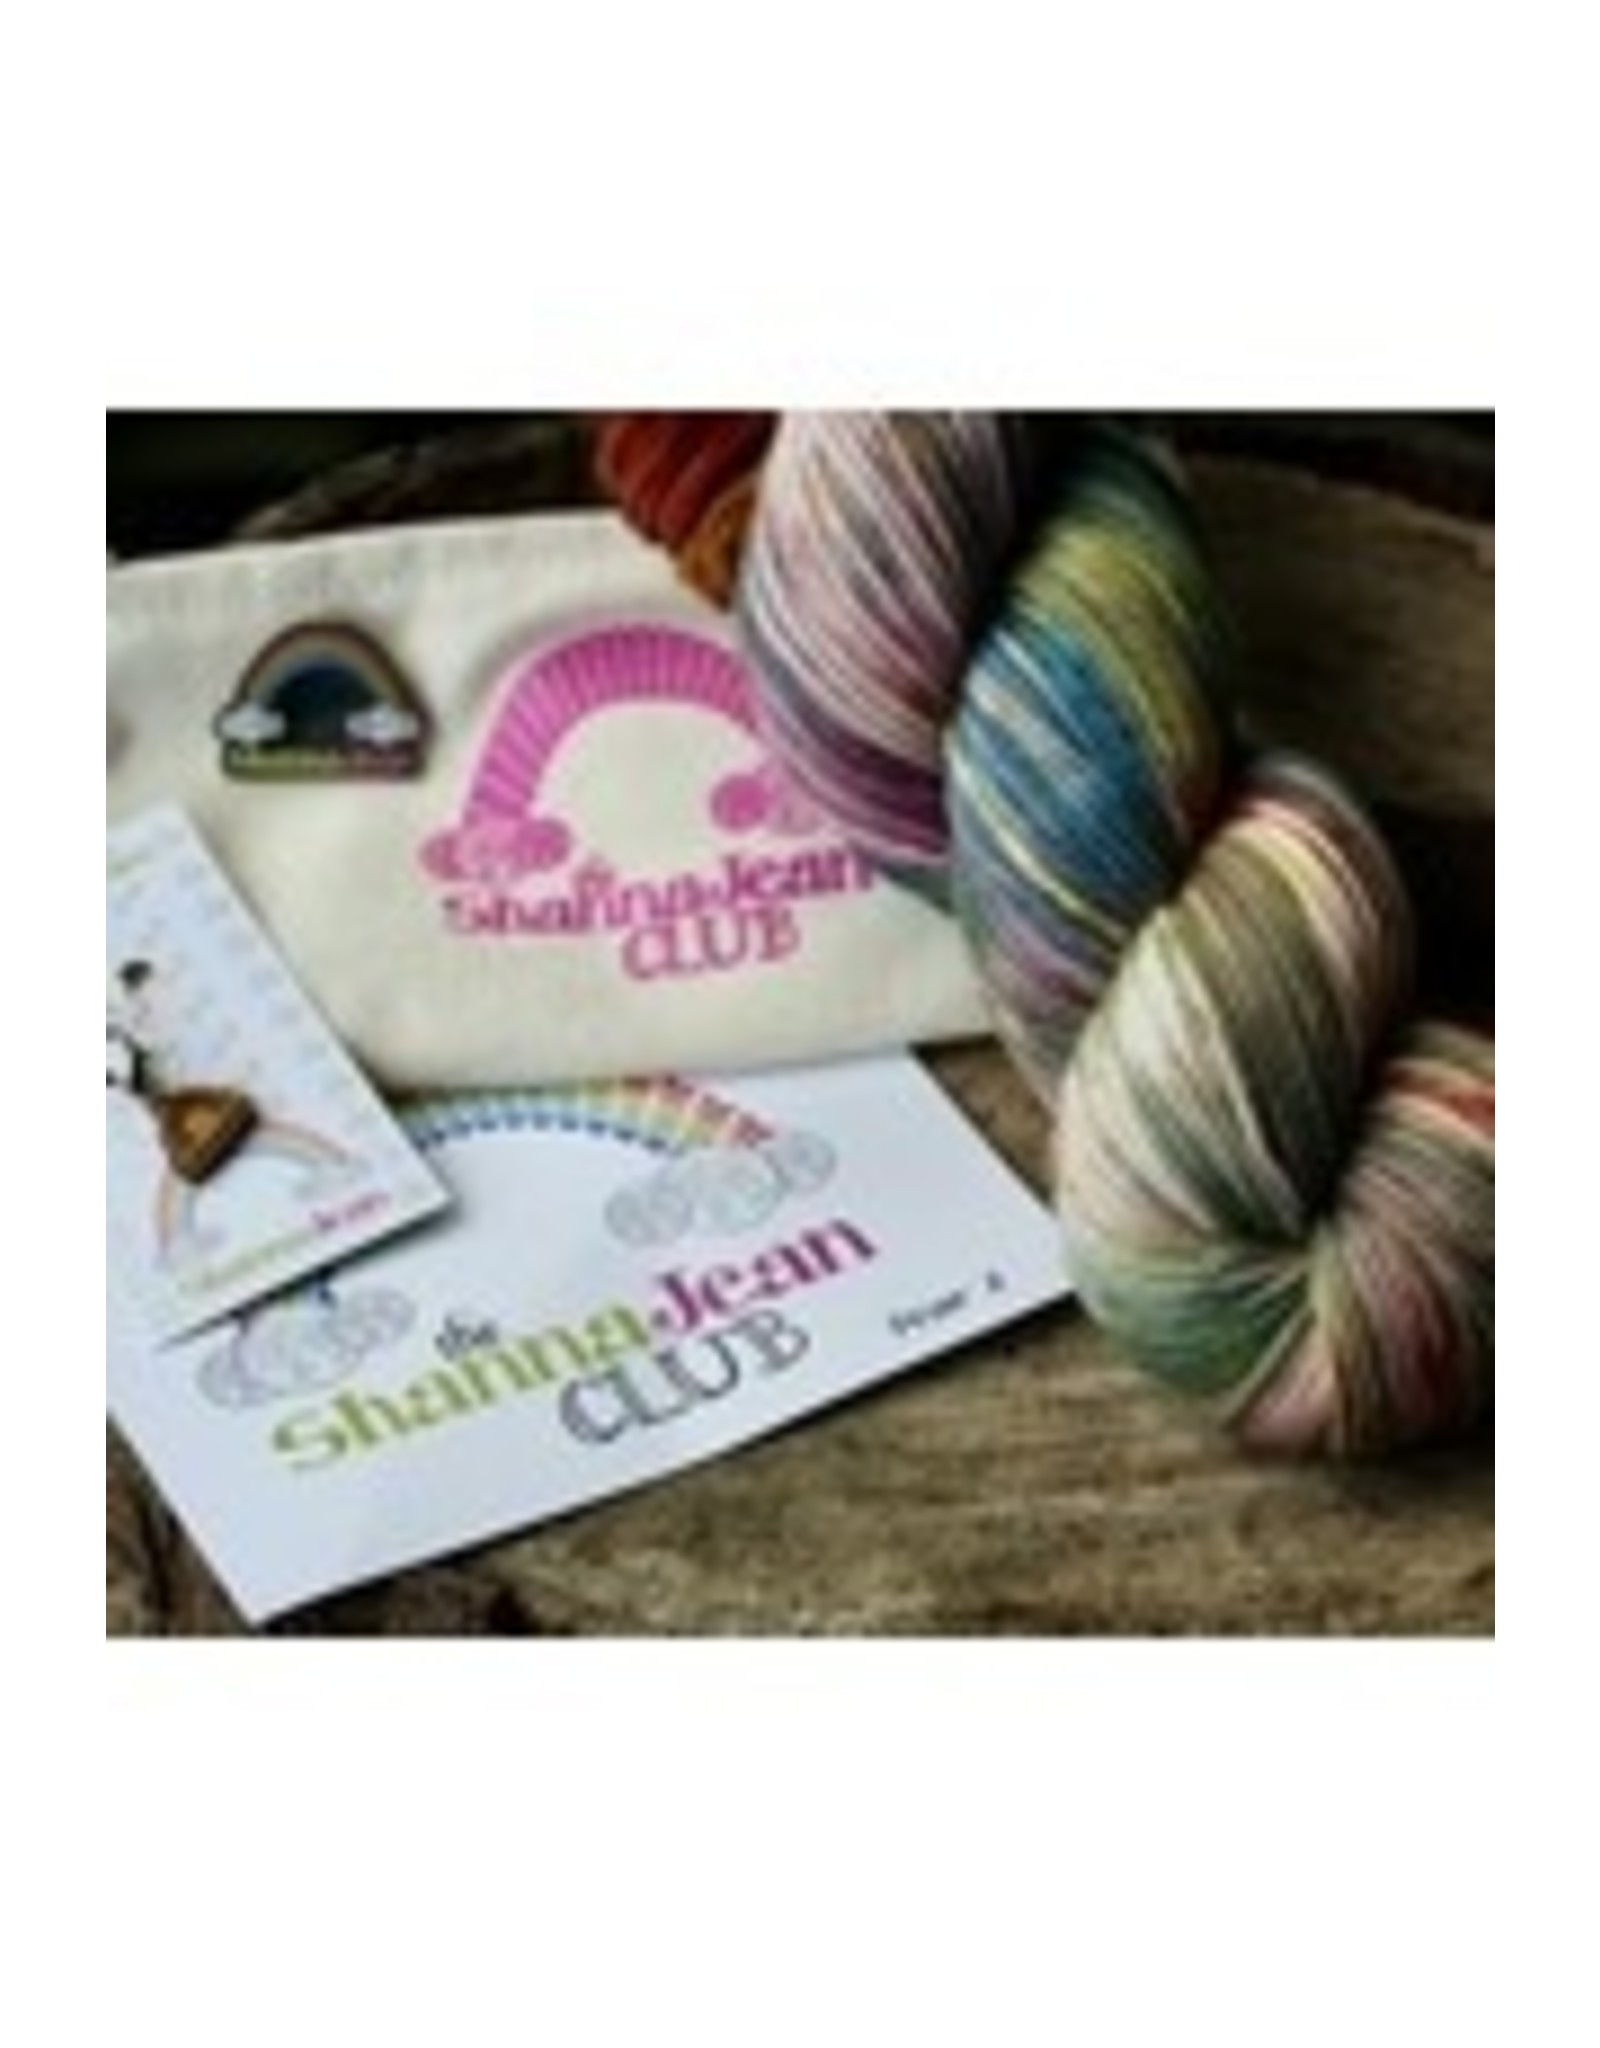 Knitted Wit **CLEARANCE** The ShannaJean Club Year 2 Intro Kit + Yarn